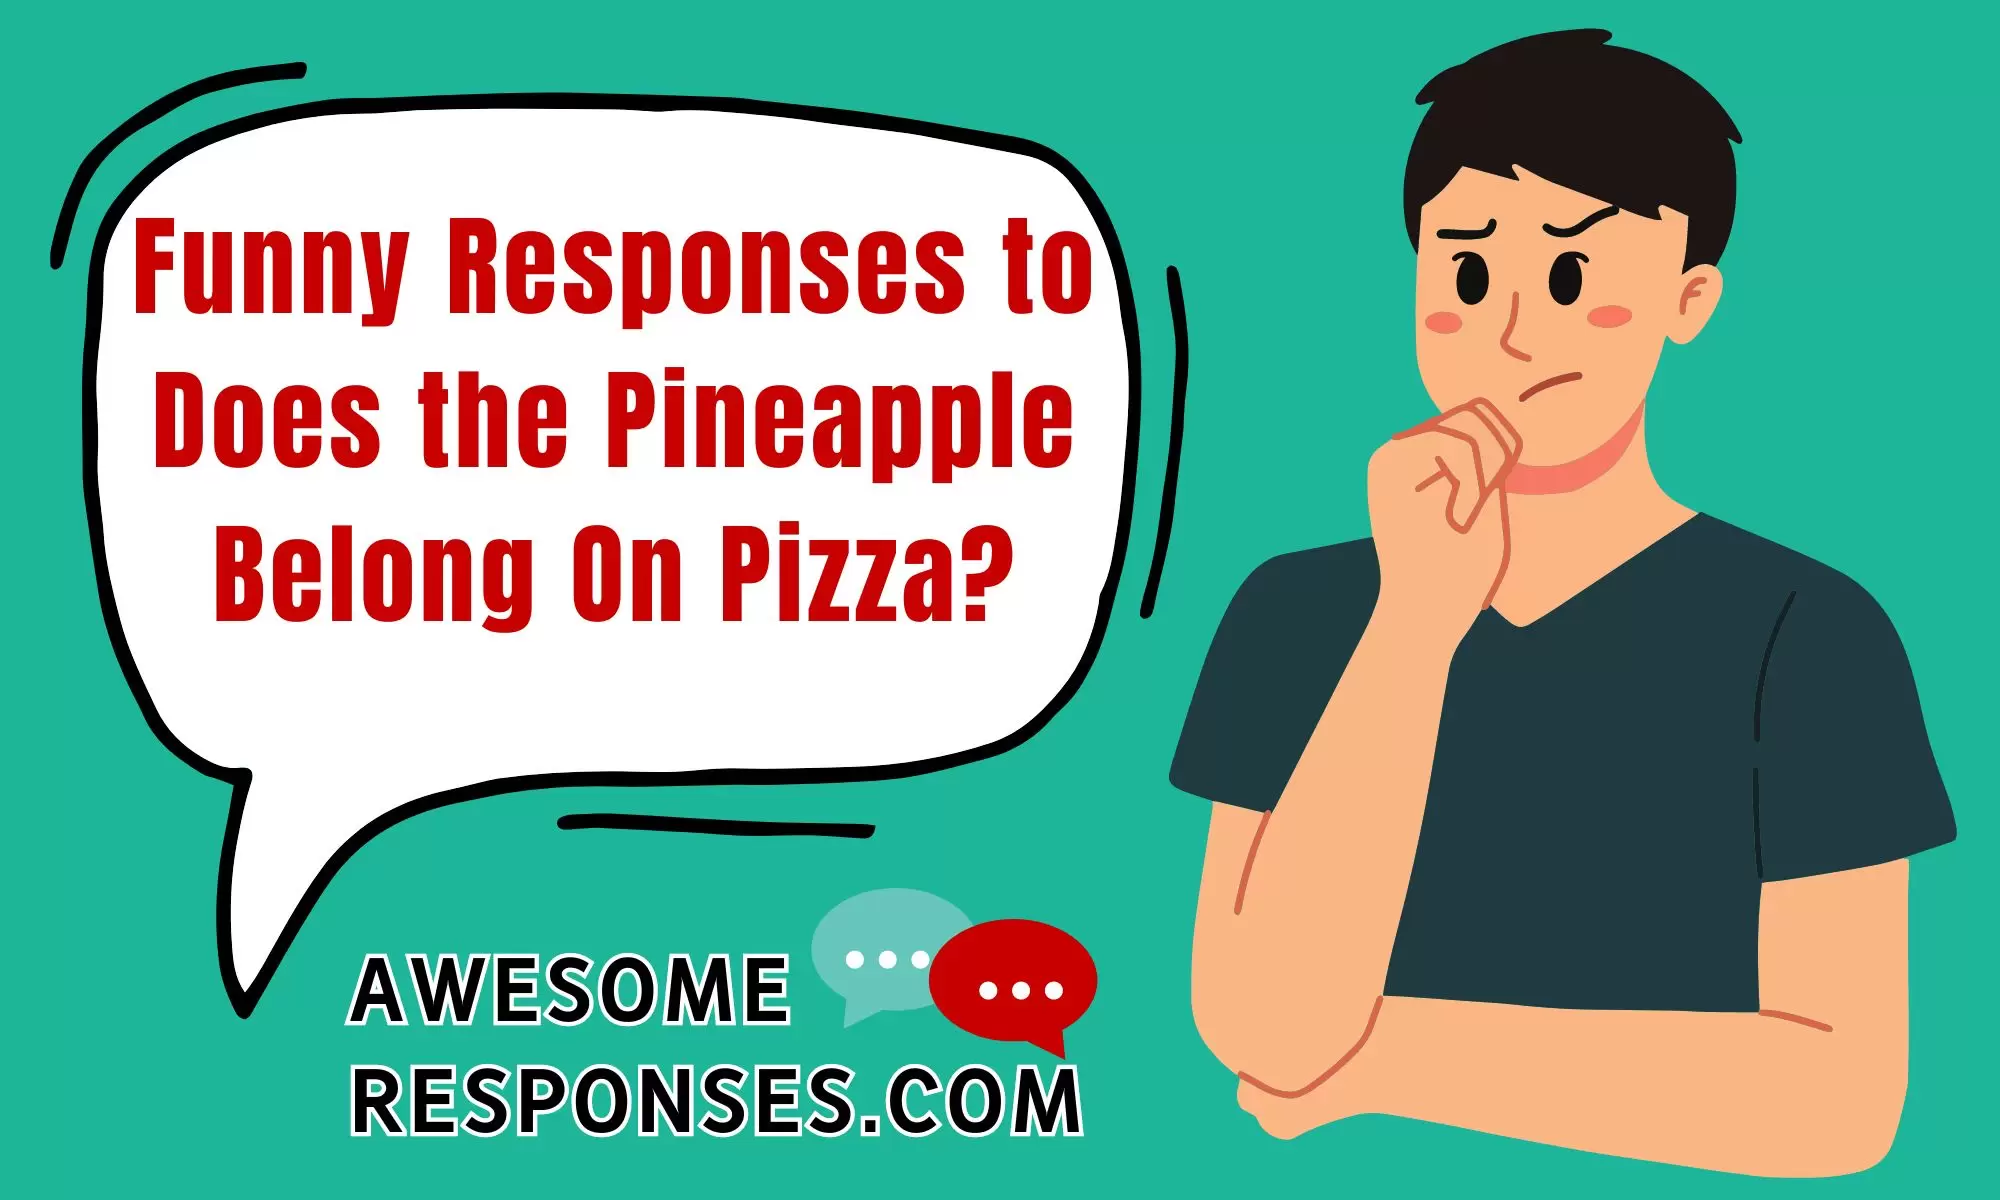 Funny Responses to Does the Pineapple Belong On Pizza?